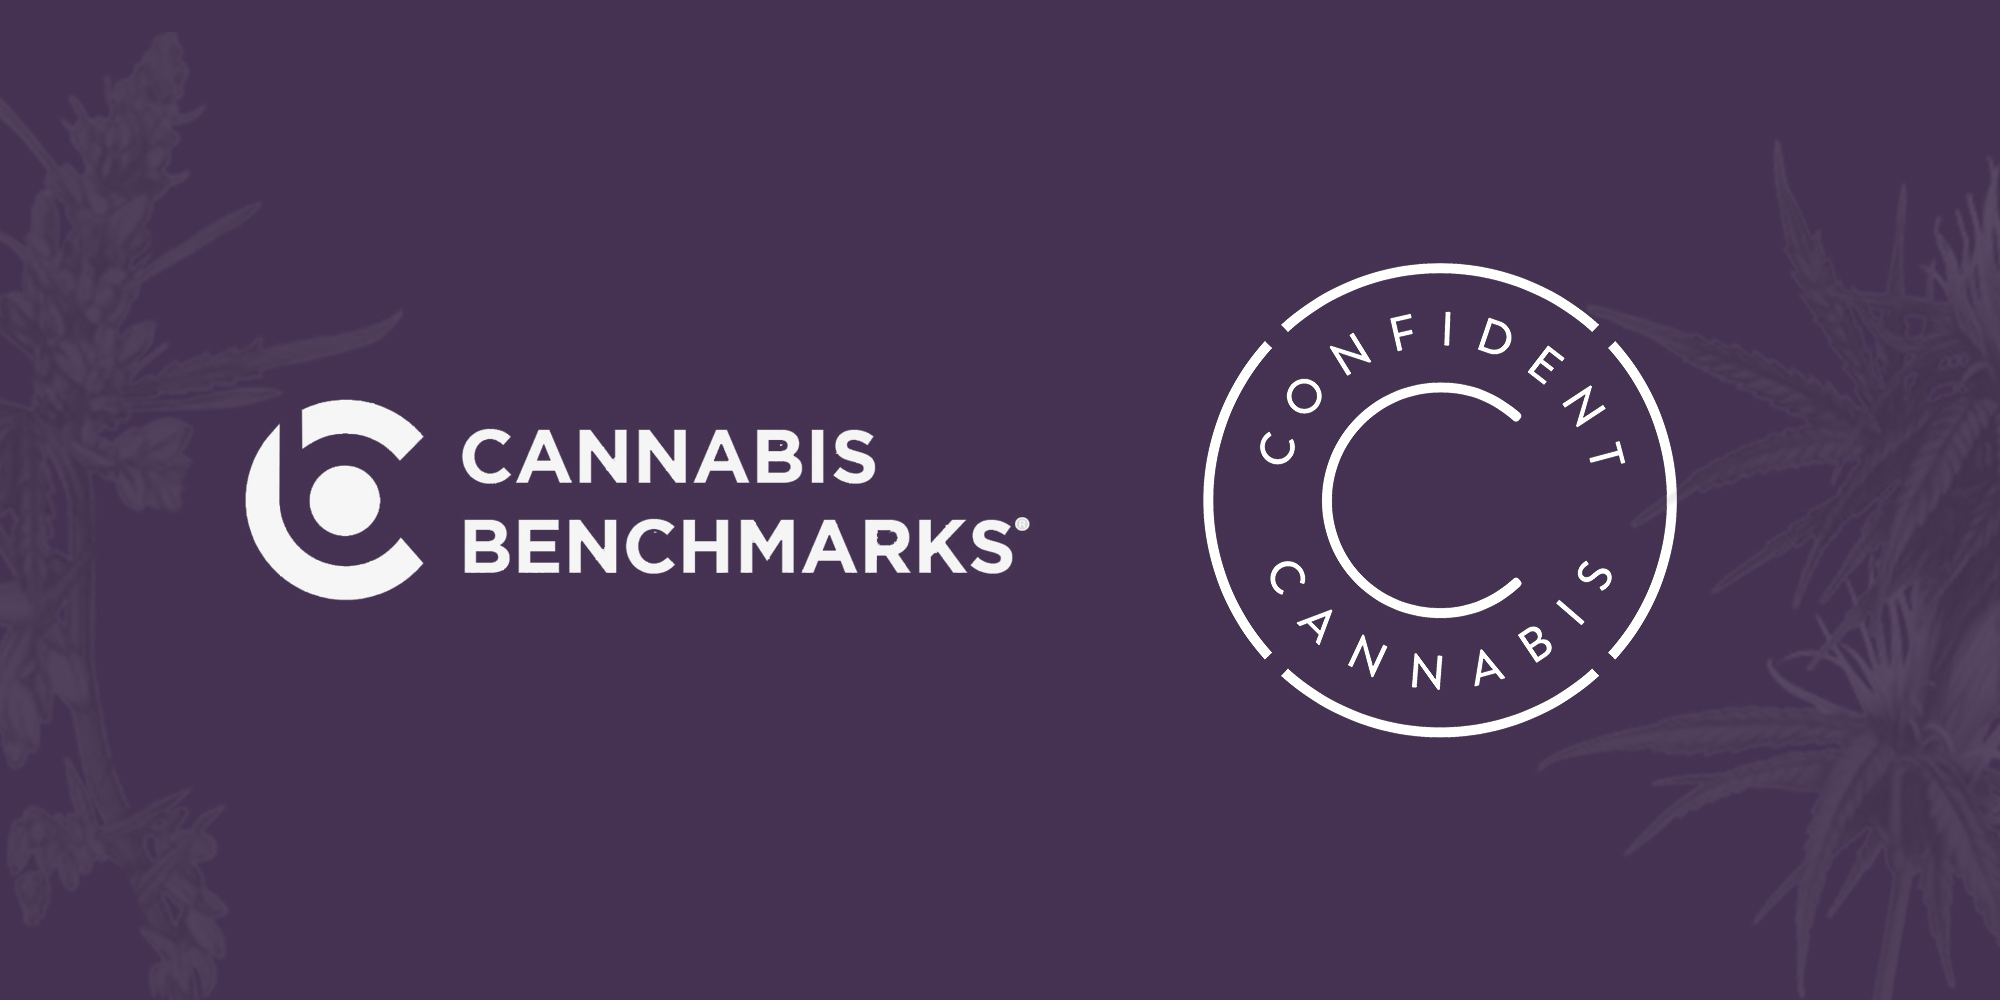 Cannabis benchmarks, confident cannabis, weekly report